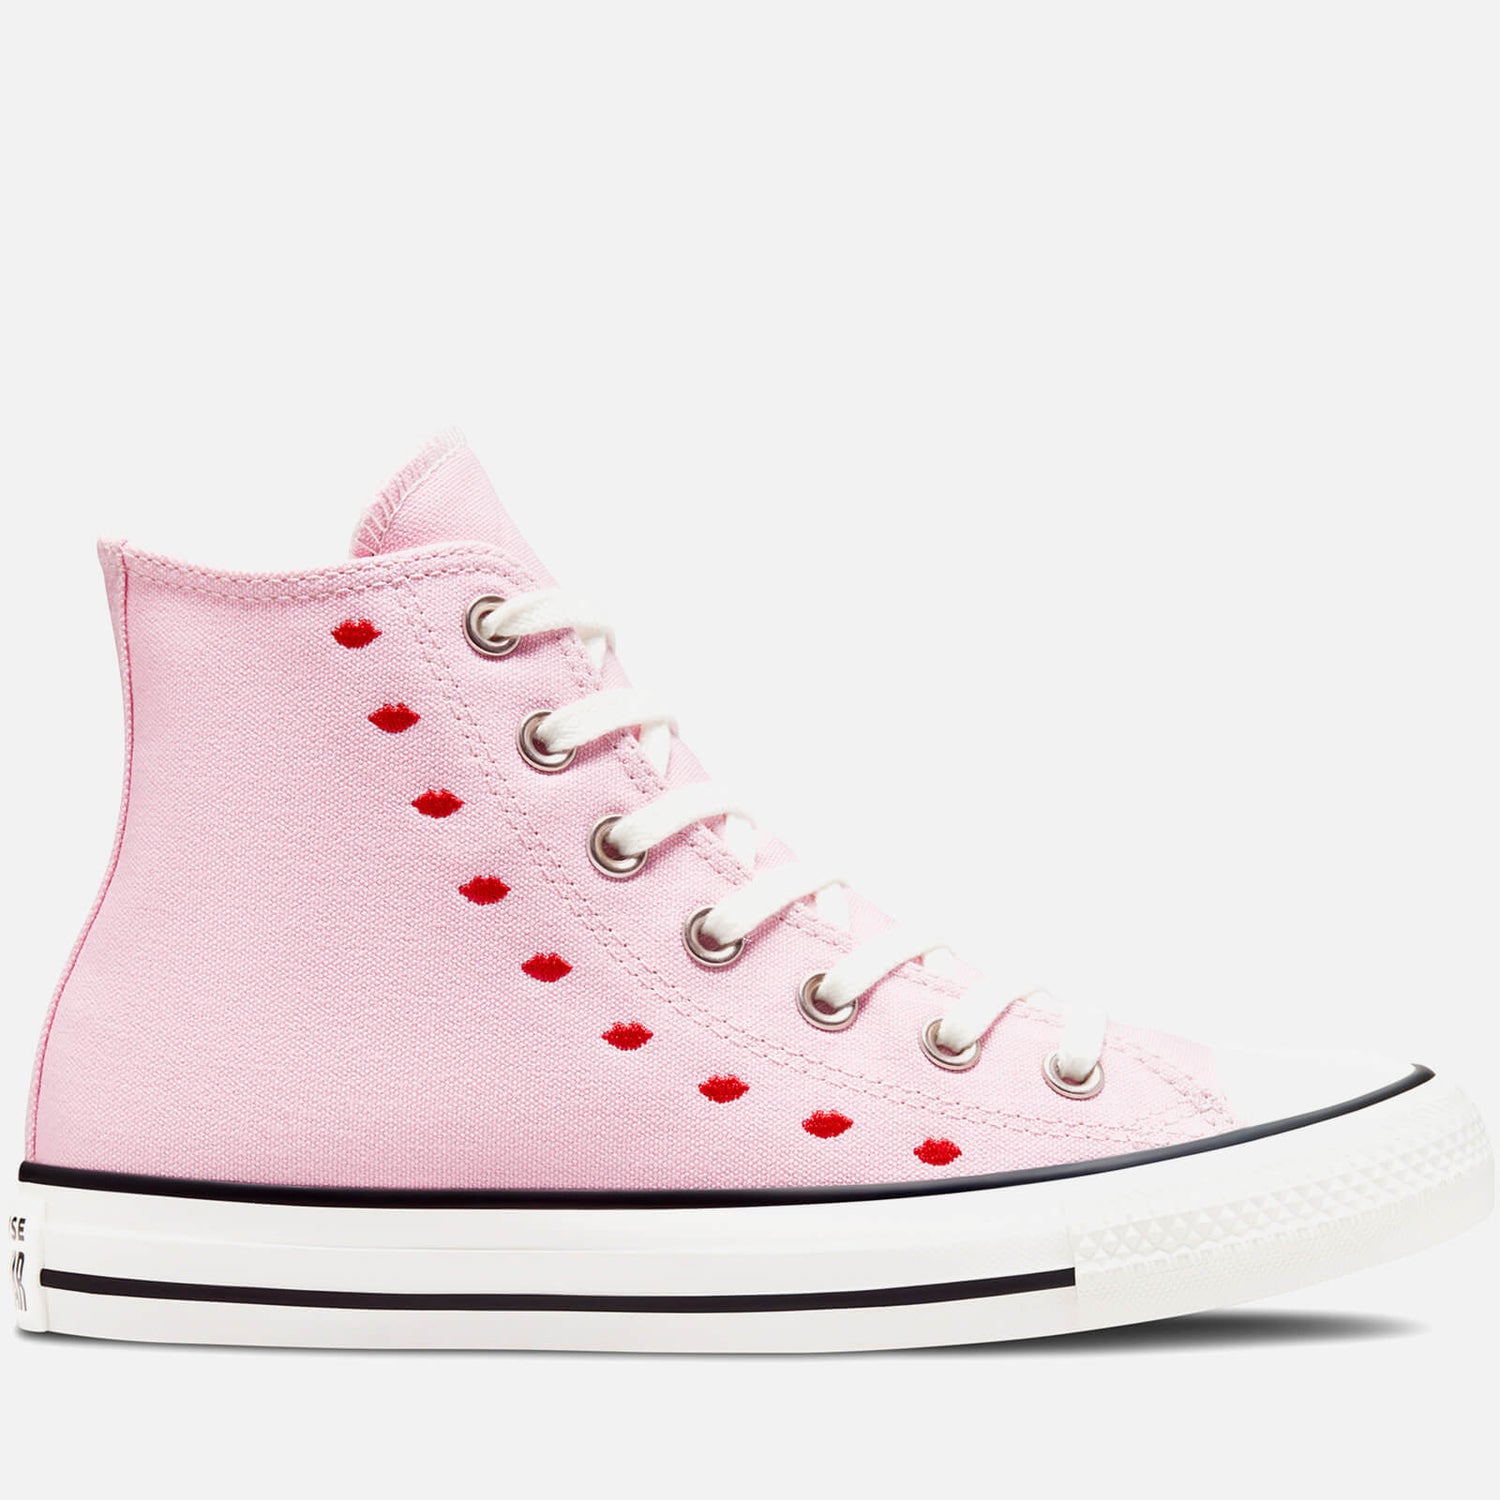 Converse Women's Chuck Taylor All Star Crafted With Love Hi-Top Trainers -  Cherry Blossom/White 